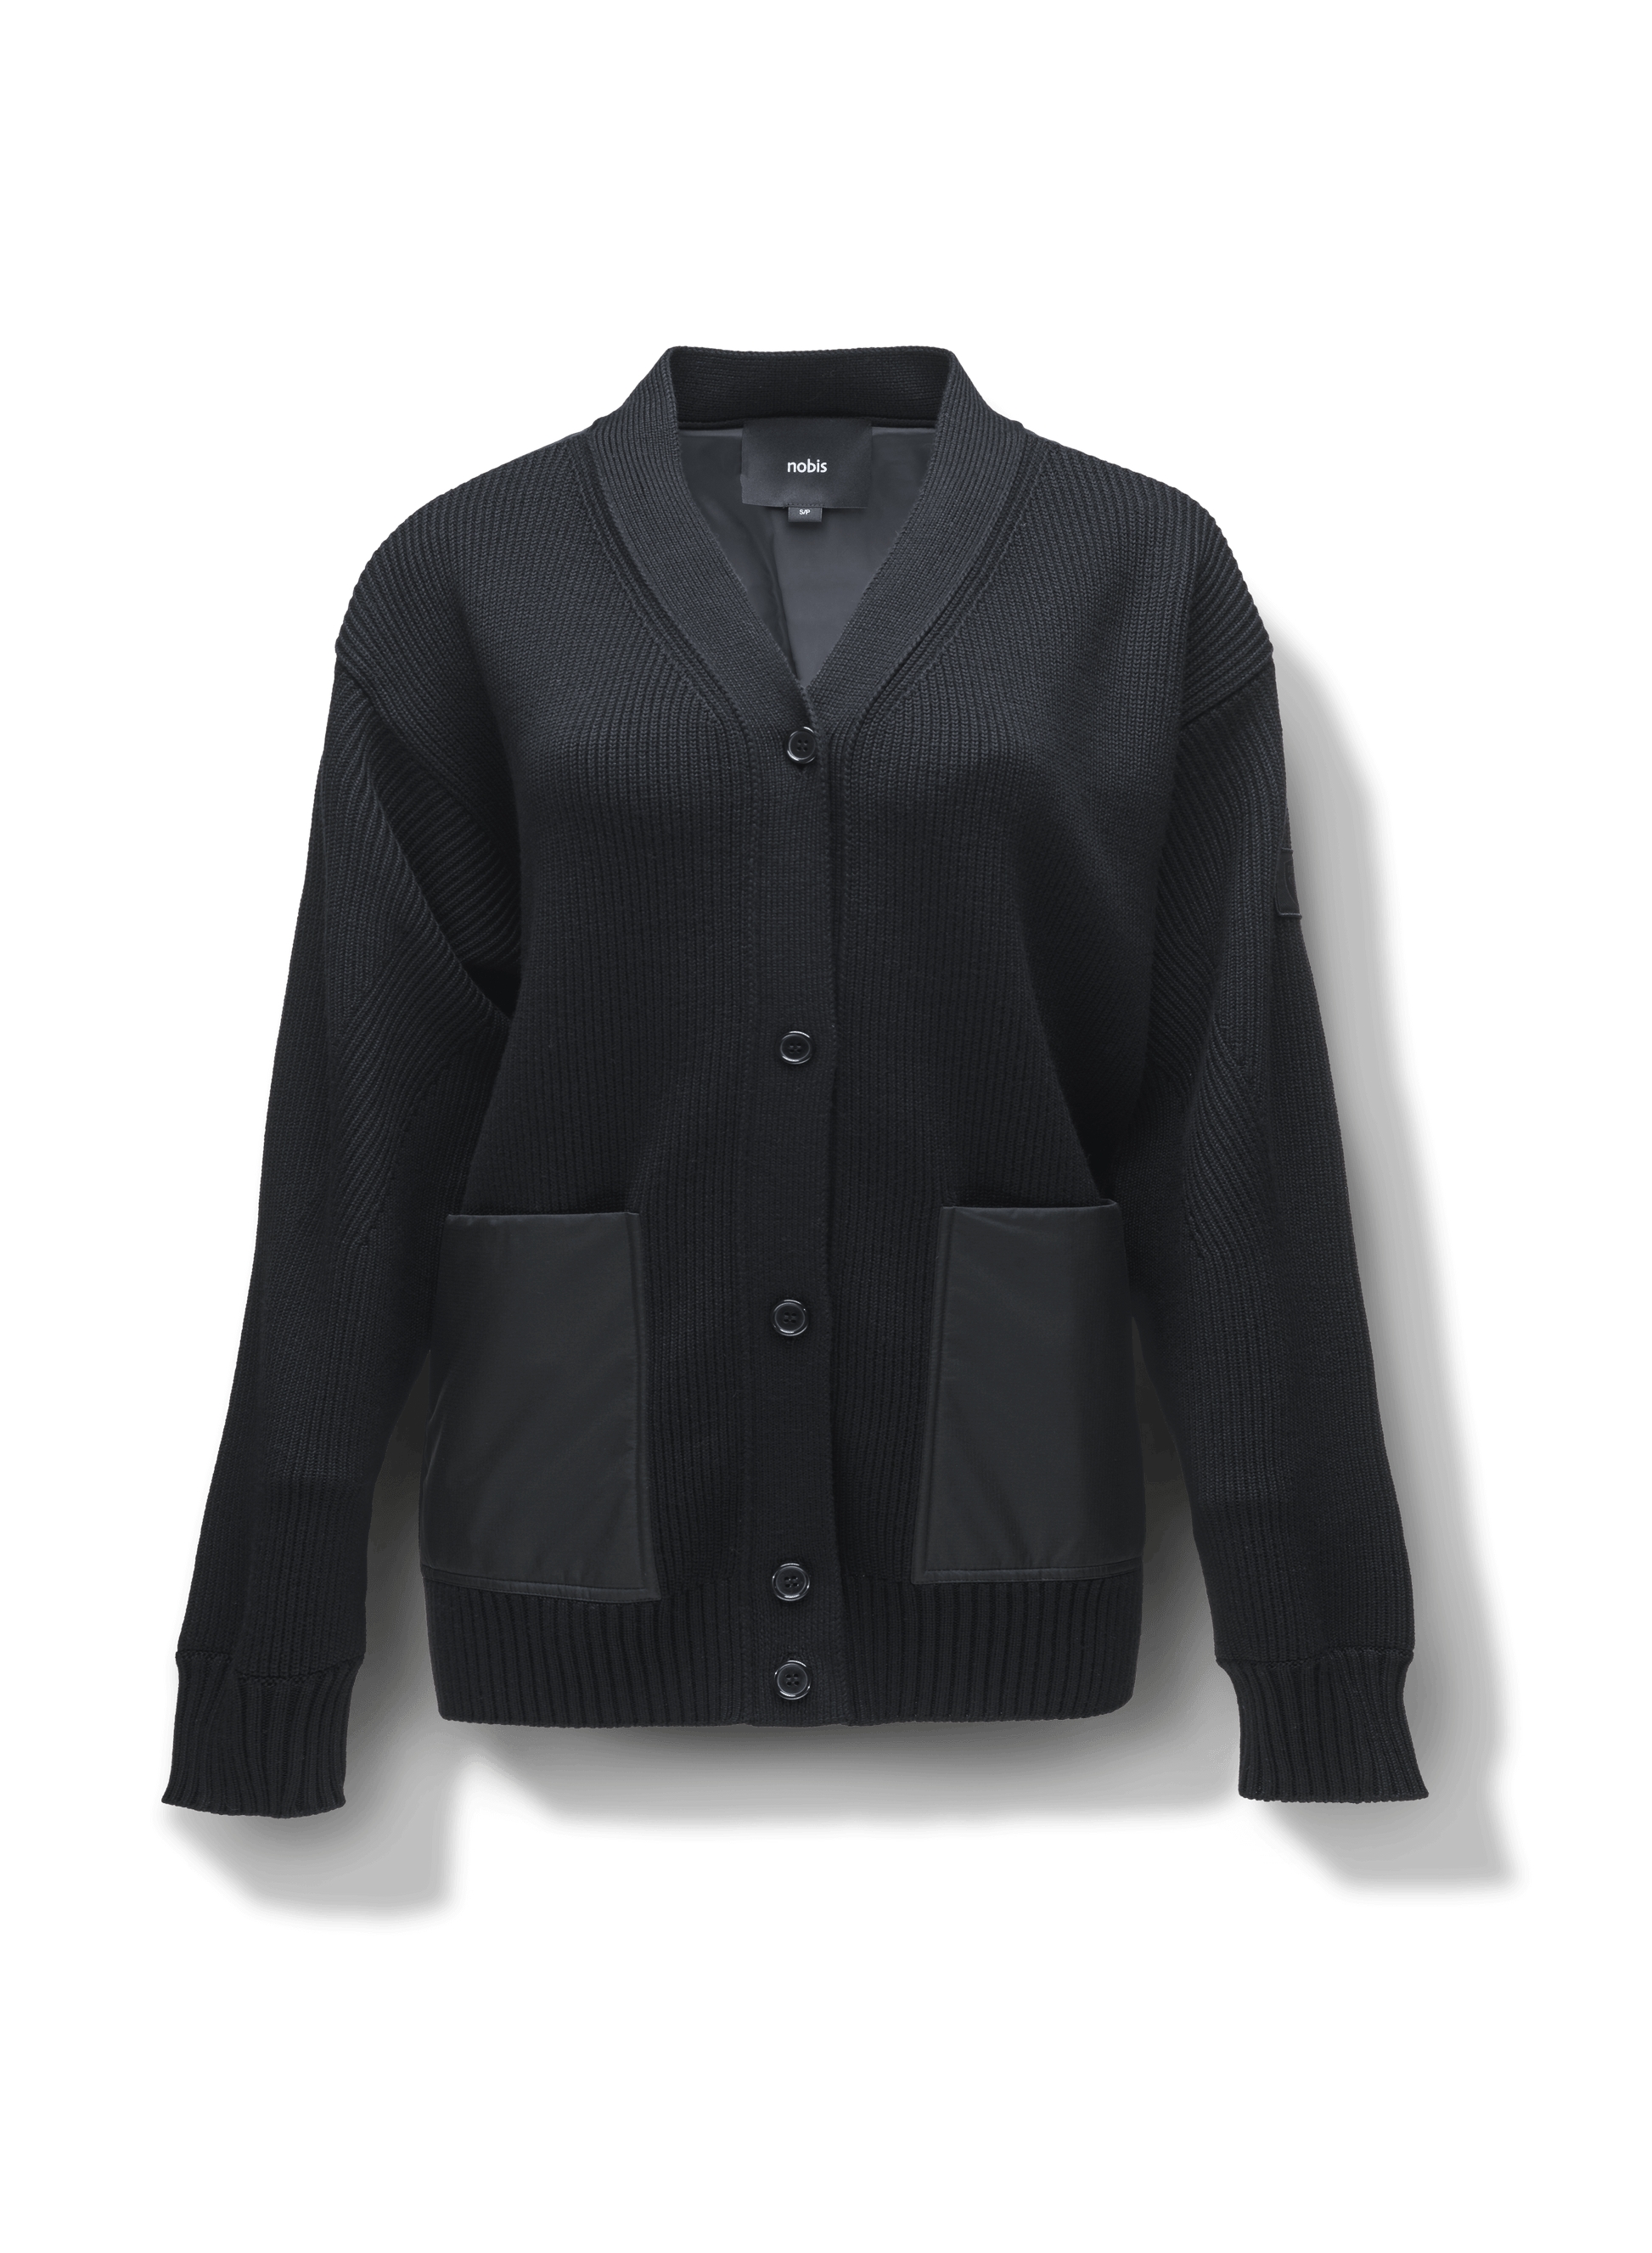 Riga Women's Tailored Button Front Cardigan in thigh length, premium virgin extra fine merino wool knit and stretch ripstop fabrication, Primaloft Gold Insulation Active+, button-front closure, quilted back detailing, front waist pockets, in Black